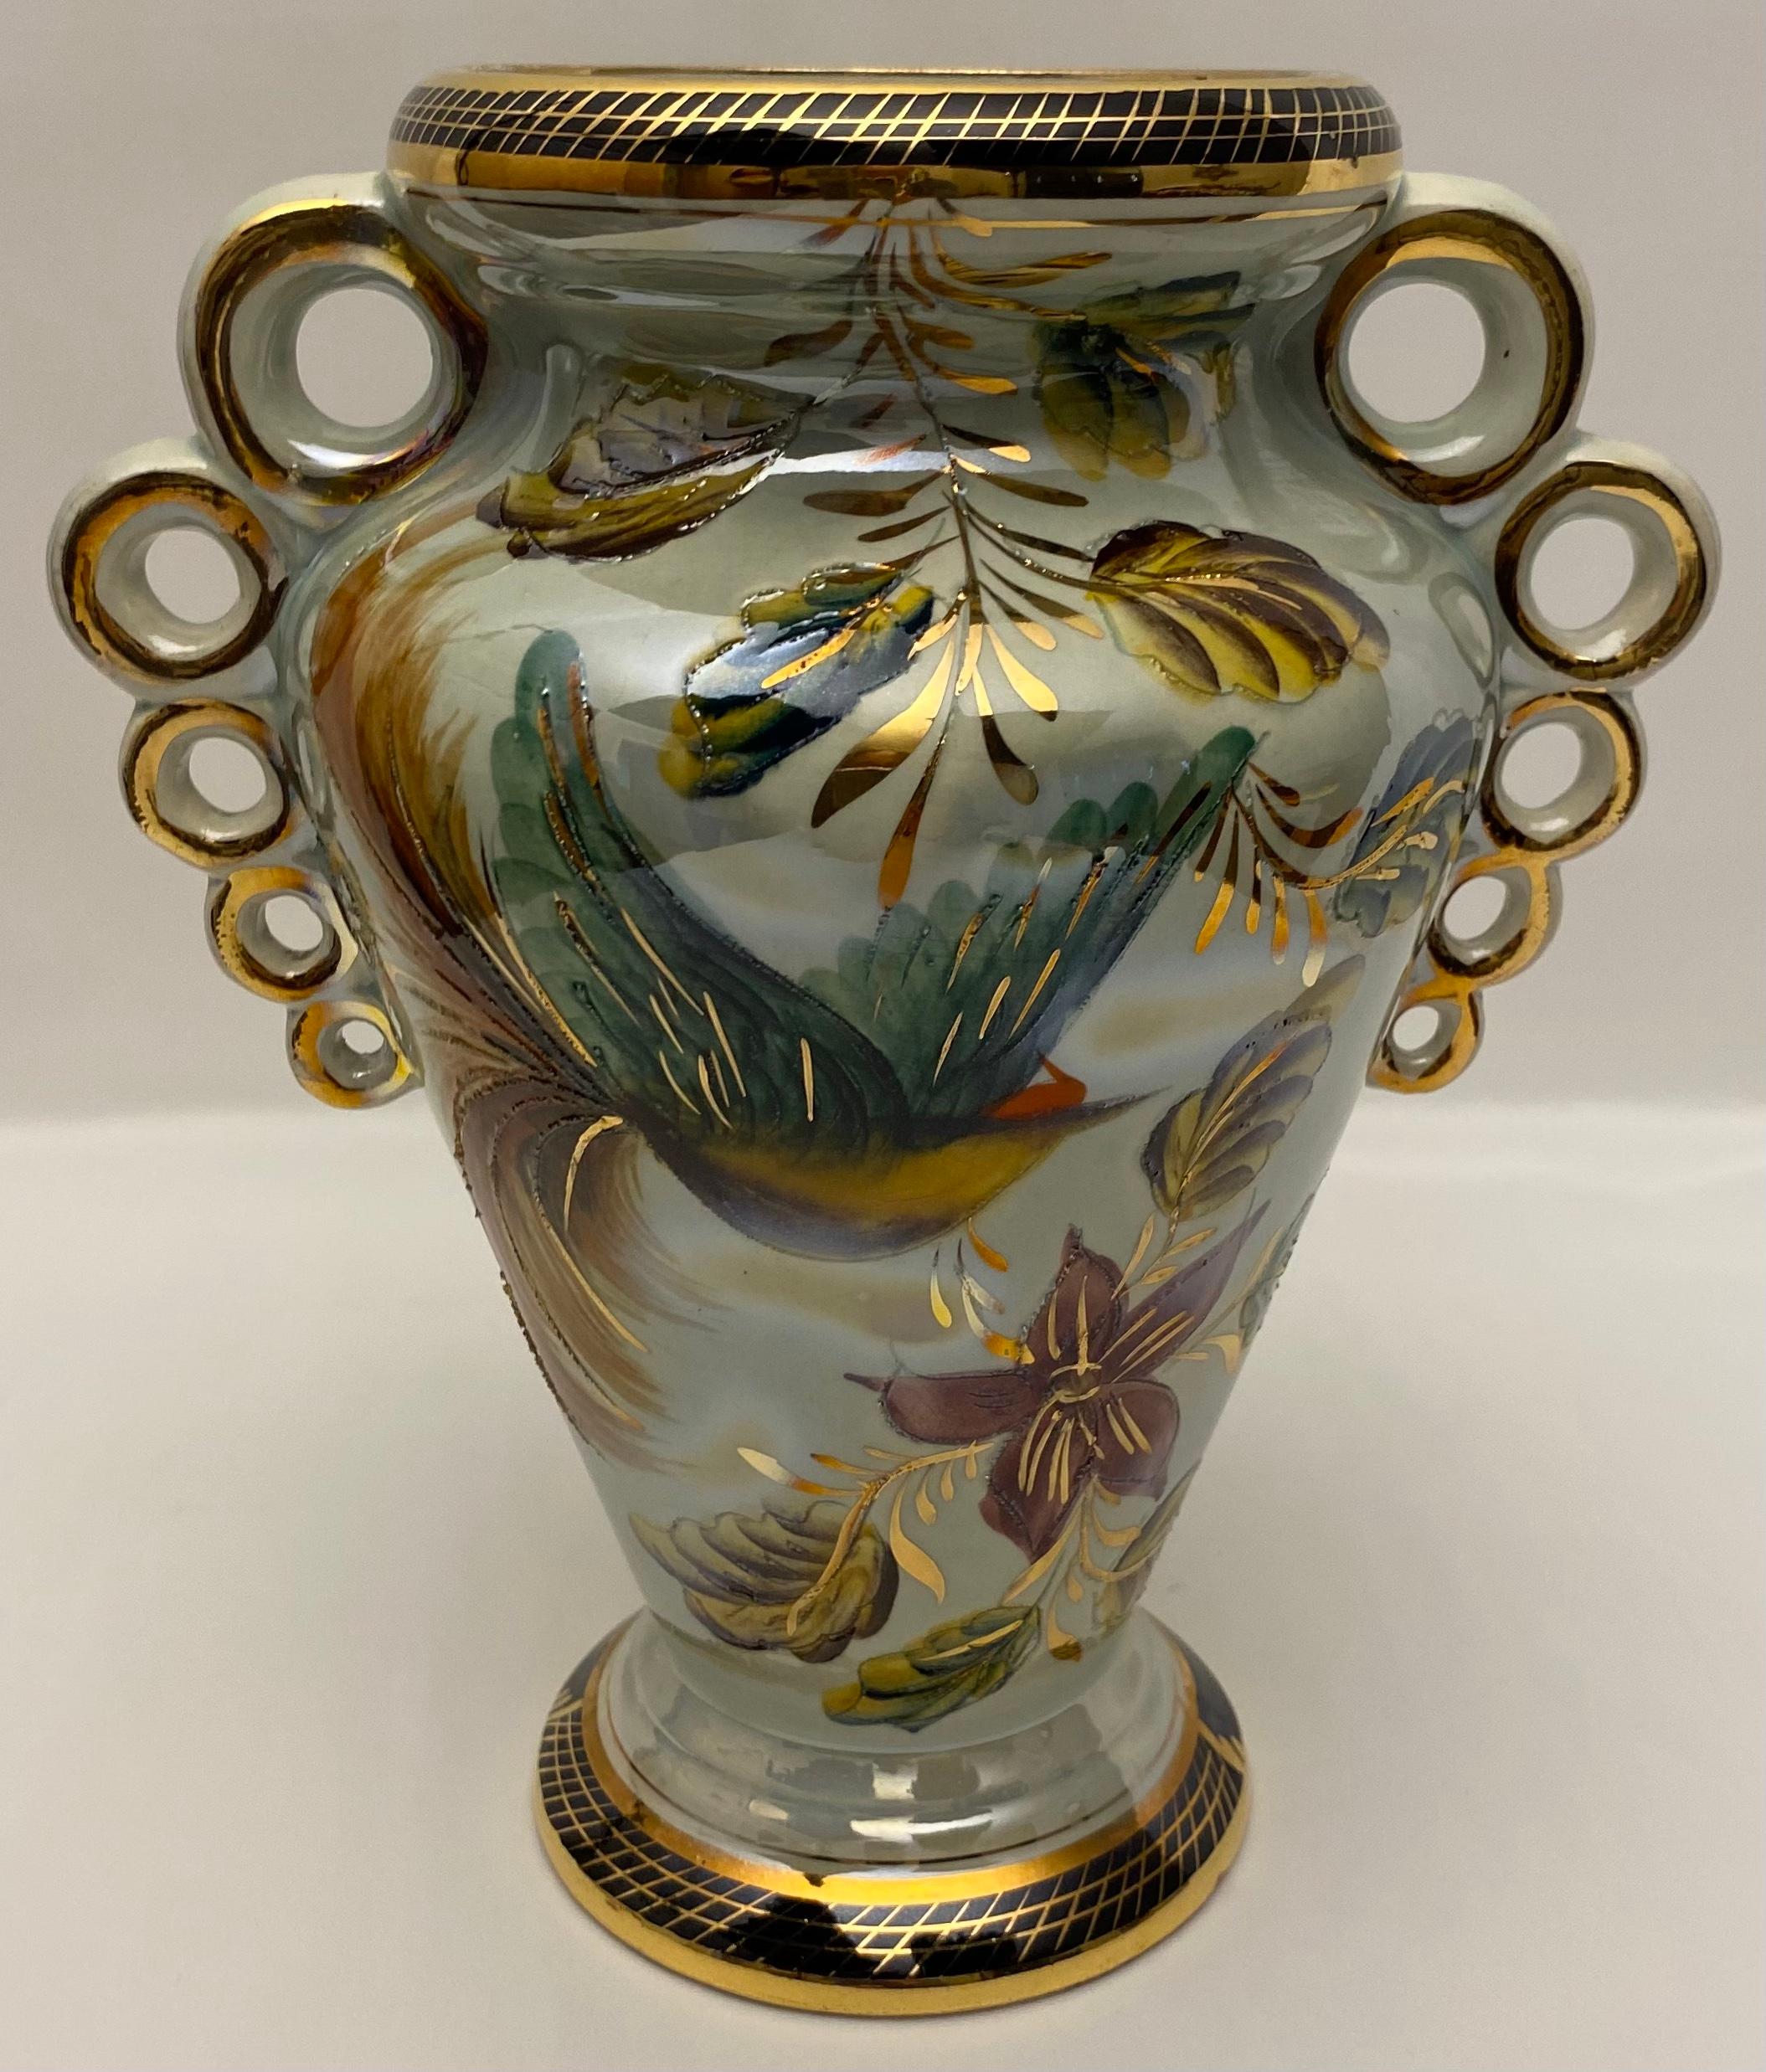 H Bequet - 4 For Sale on 1stDibs | h.bequet, h bequet quaregnon, h bequet  vase